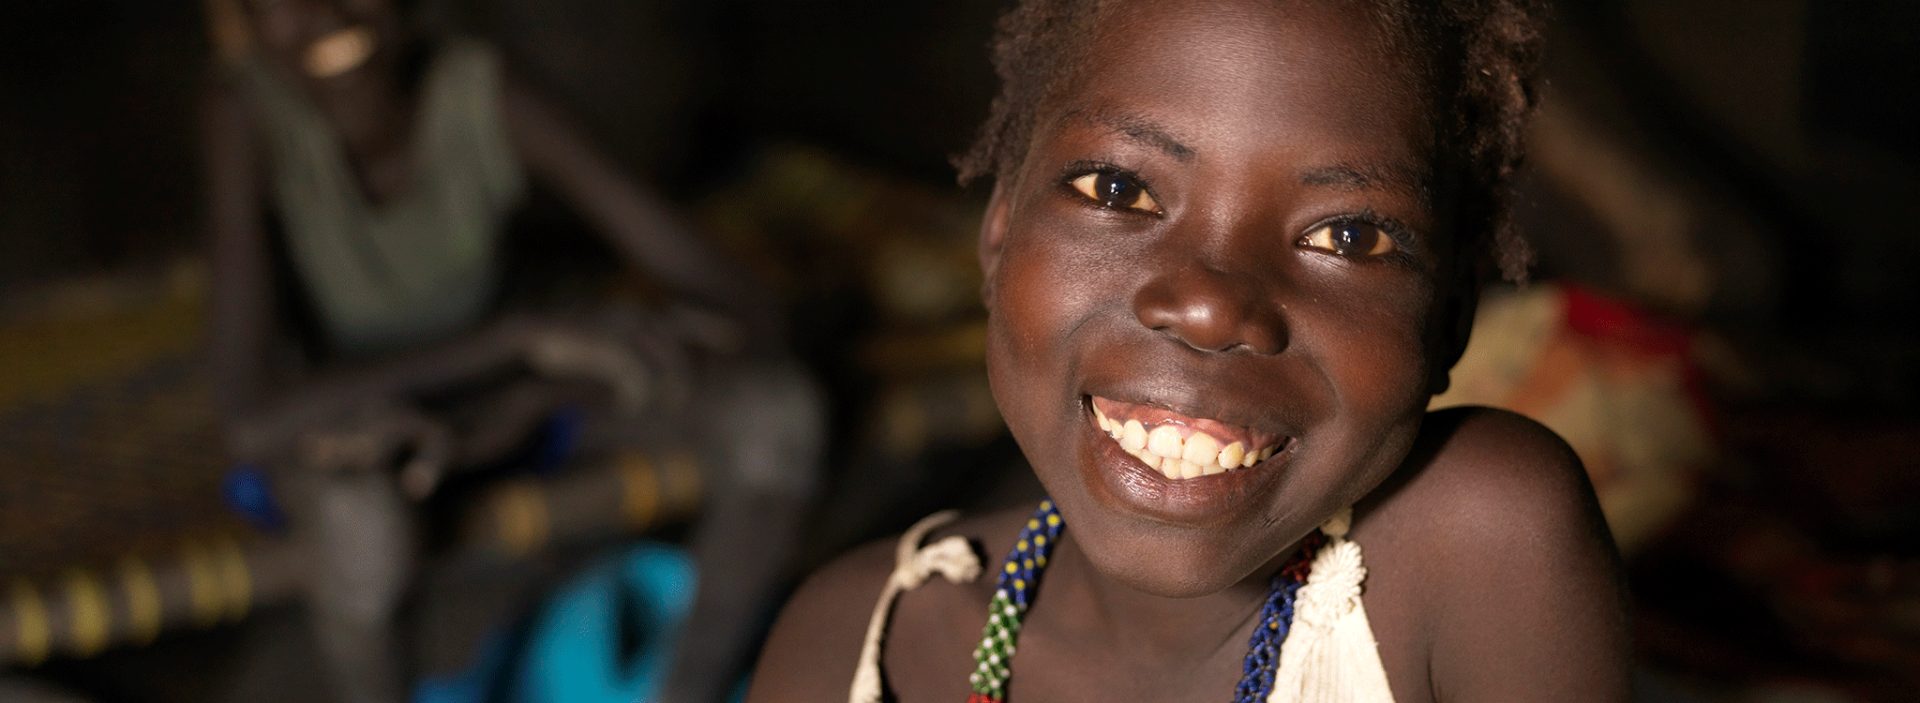 A smiling girl who's been supported by Action Against Hunger.